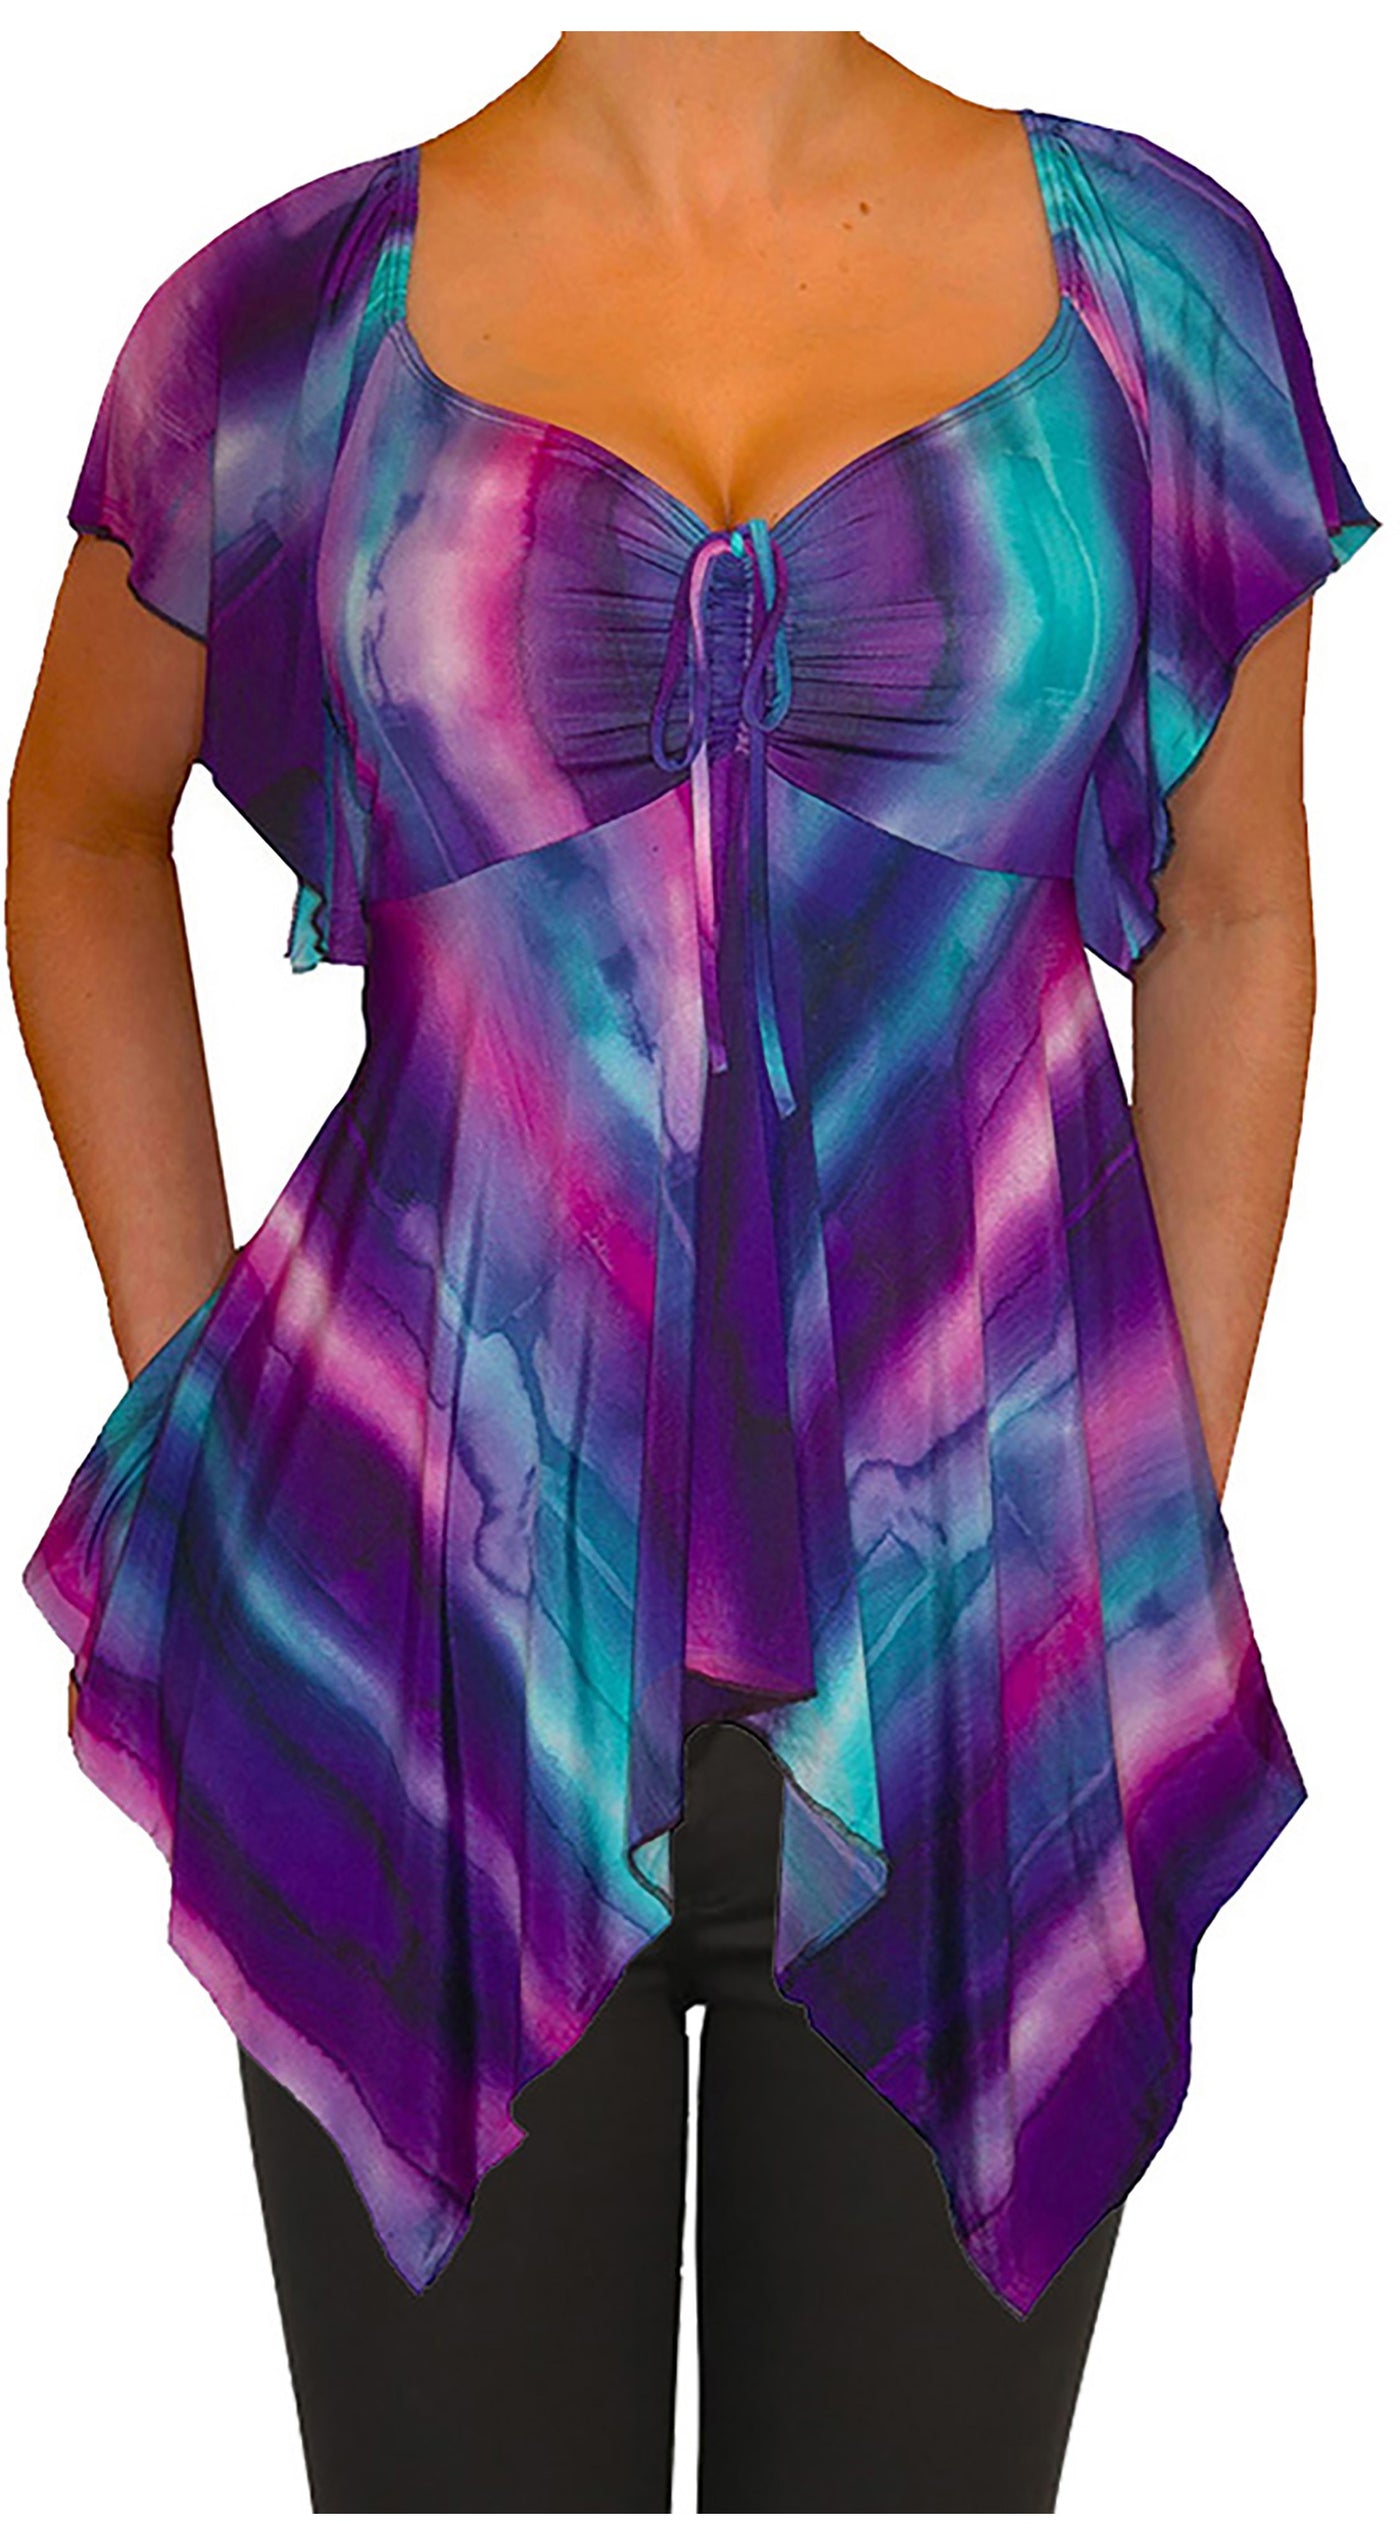 Plus Size Tops - Blouses | Purple V-Neck Top | Made In USA | Funfash